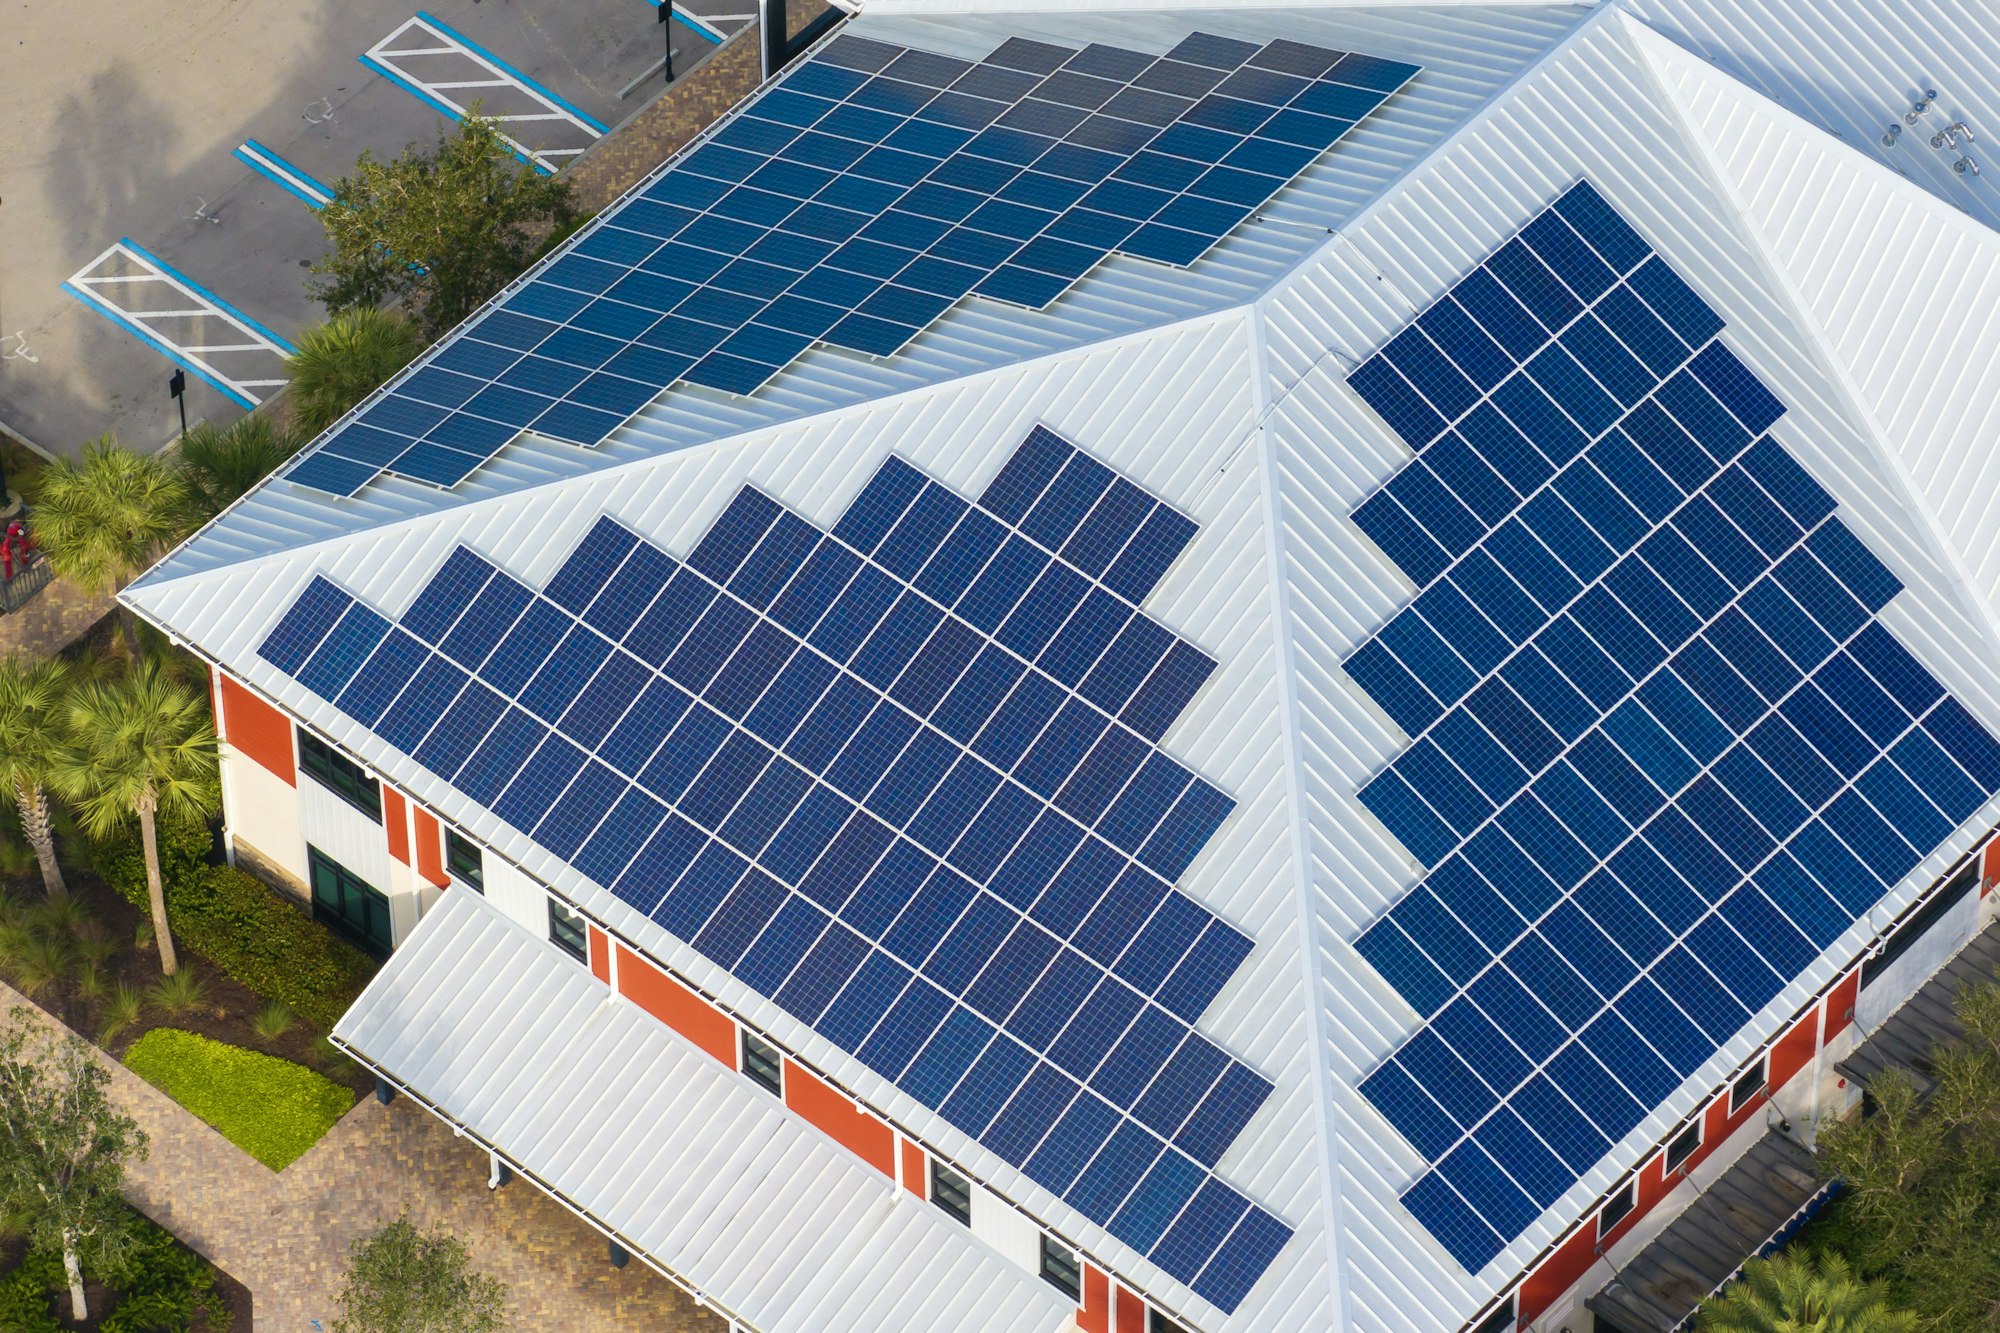 Photovoltaic panels on solar rooftop of Florida commercial building